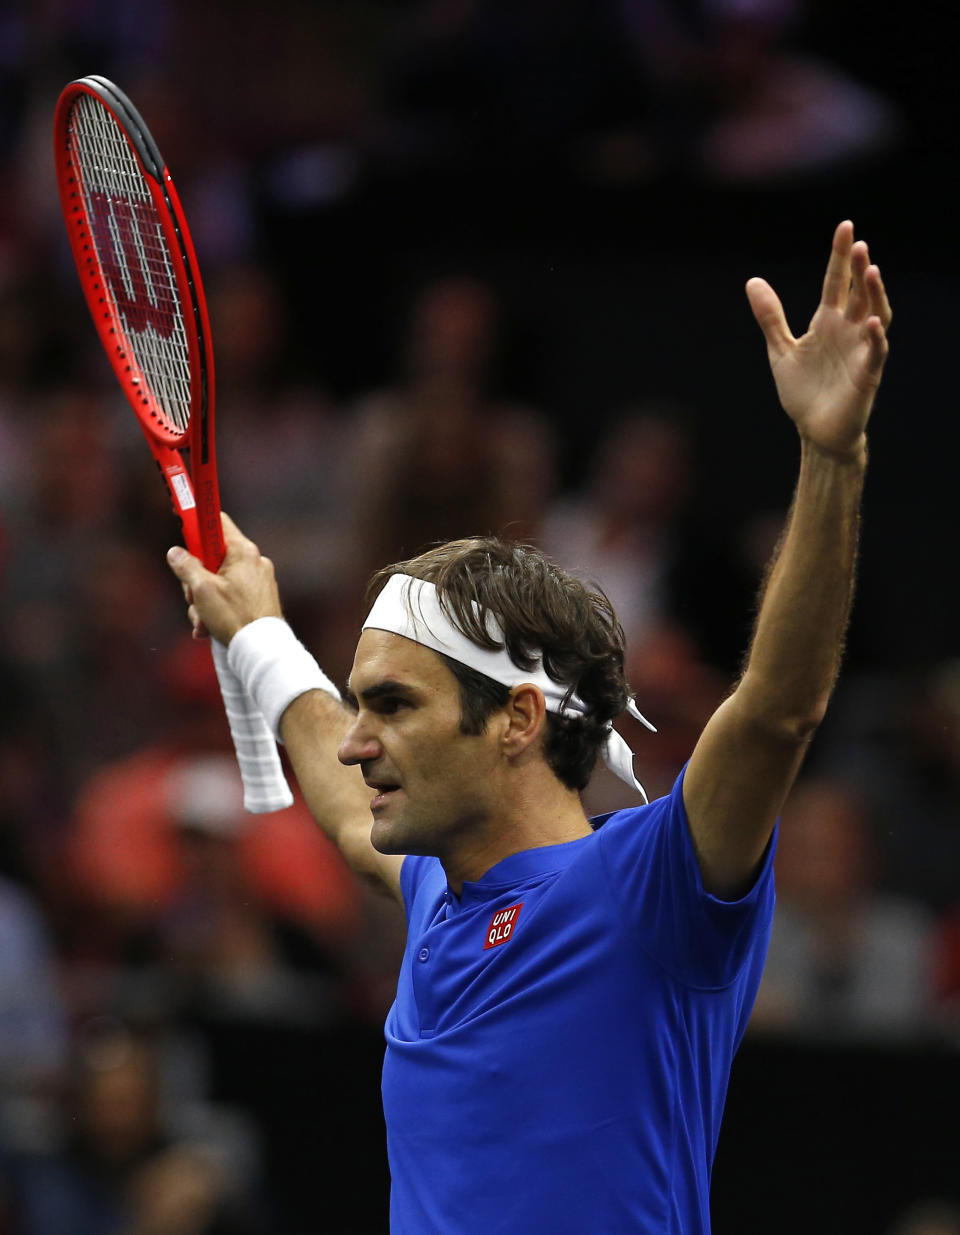 Team Europe's Roger Federer celebrates a men's singles tennis match win against Team World's John Isner at the Laver Cup, Sunday, Sept. 23, 2018, in Chicago. (AP Photo/Jim Young)